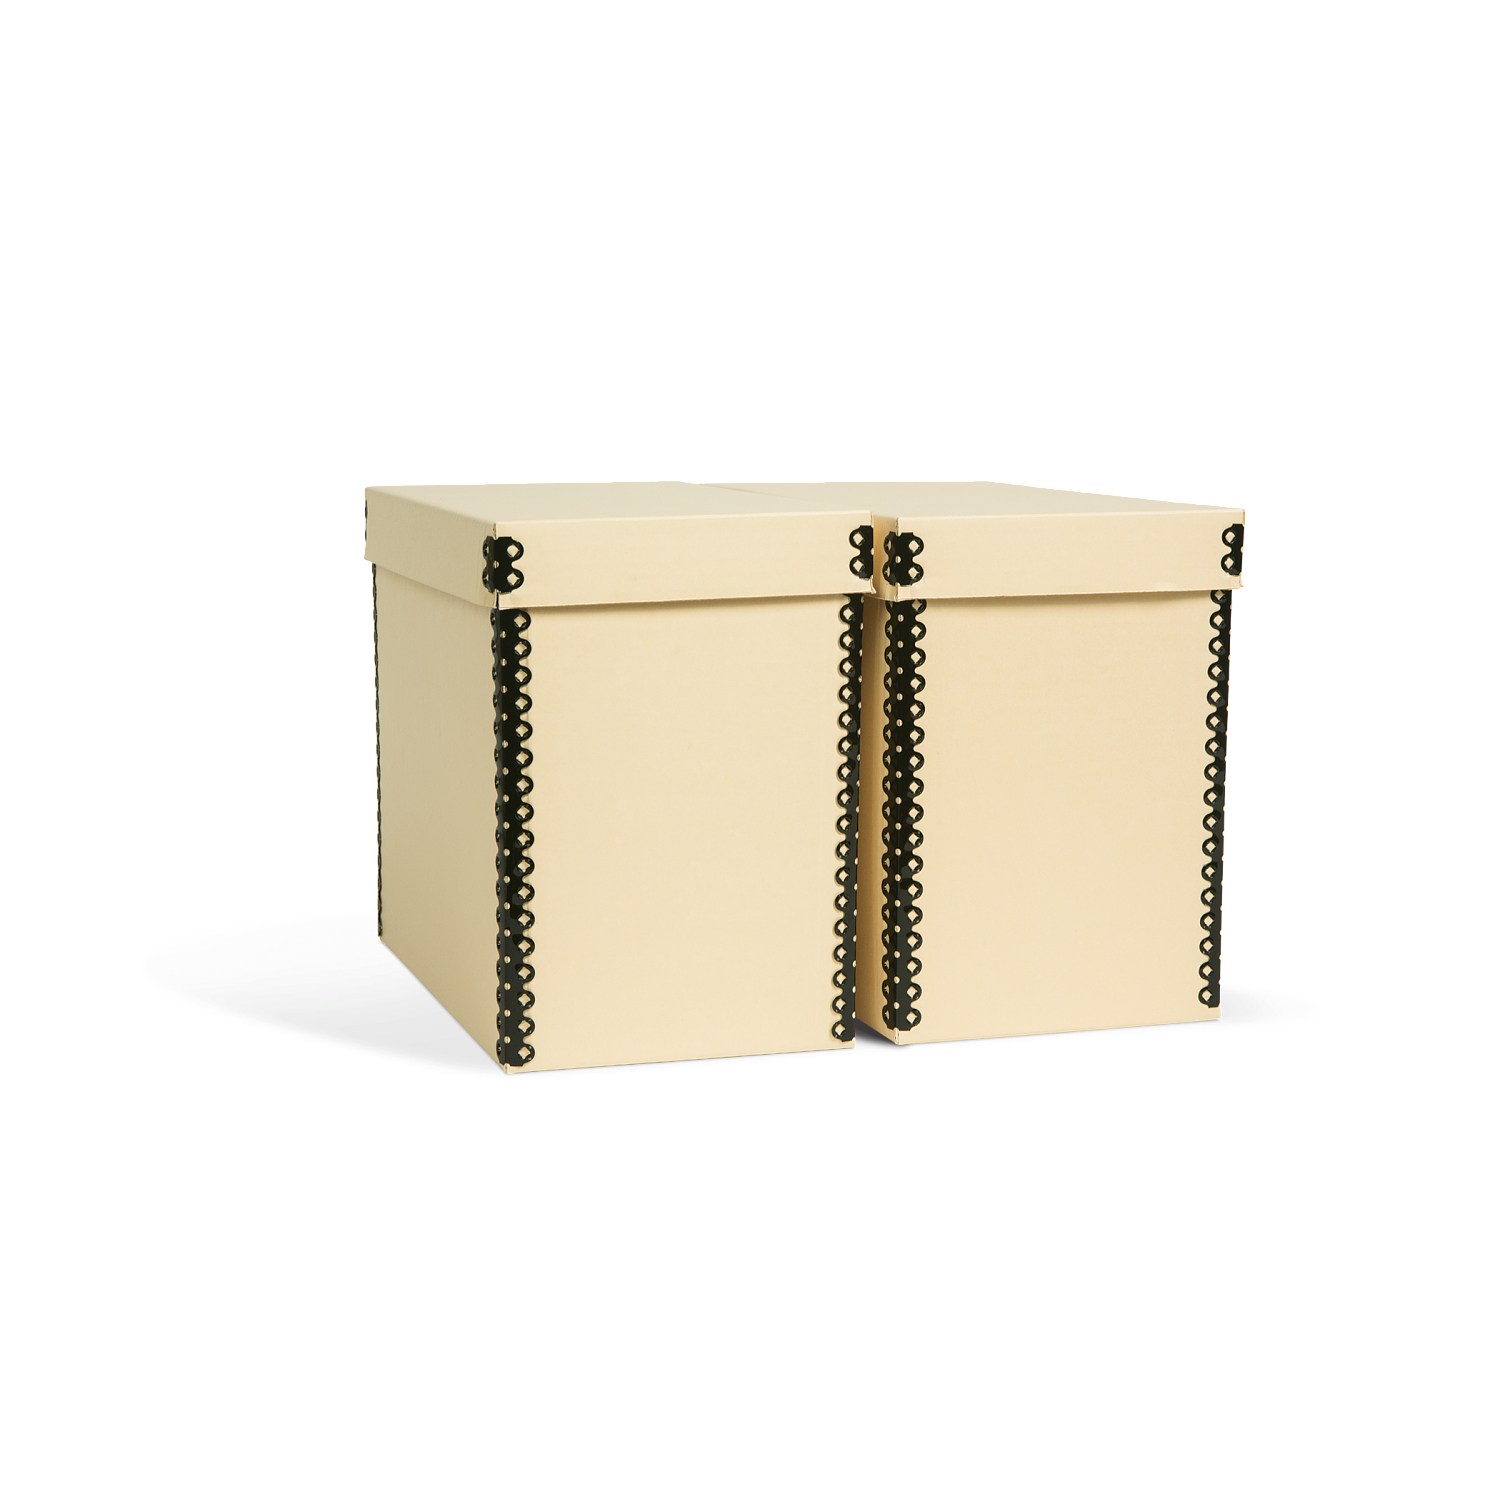 Archival Storage Boxes, Acid-Free Document & Photo Boxes, Gaylord Archival